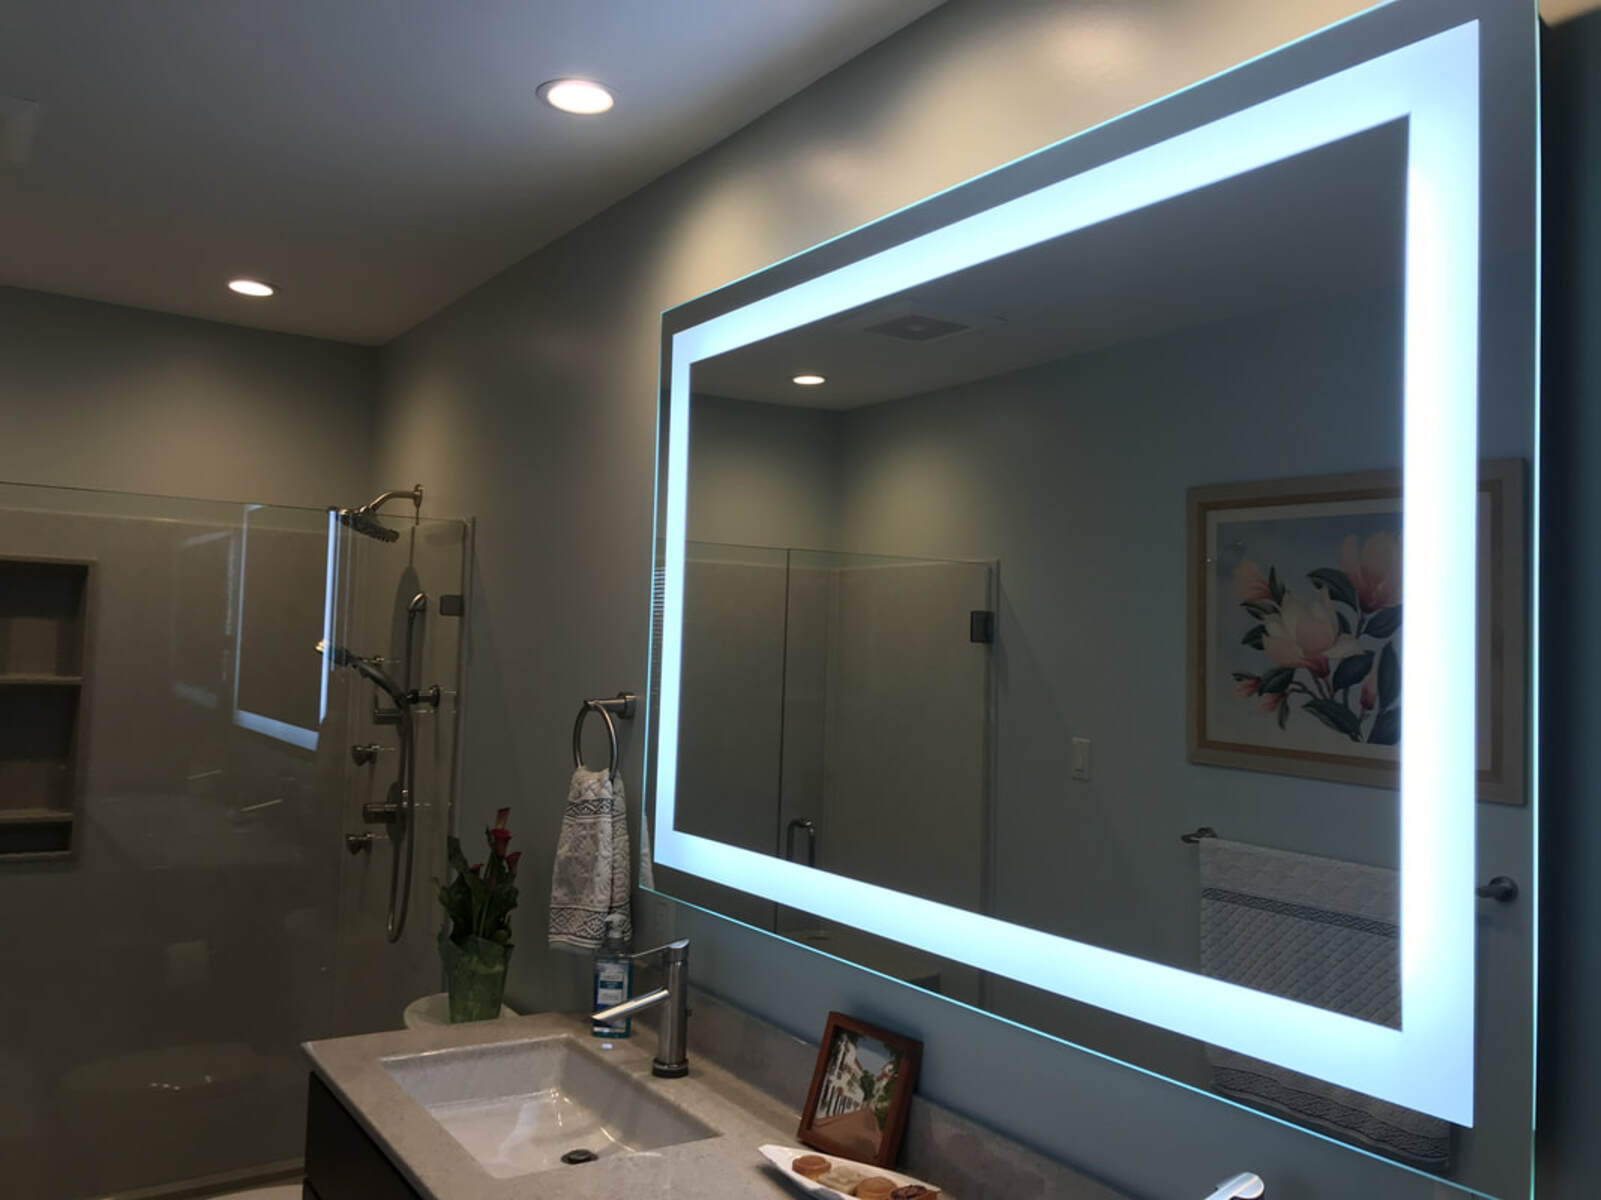 How To Install Lighted Mirror